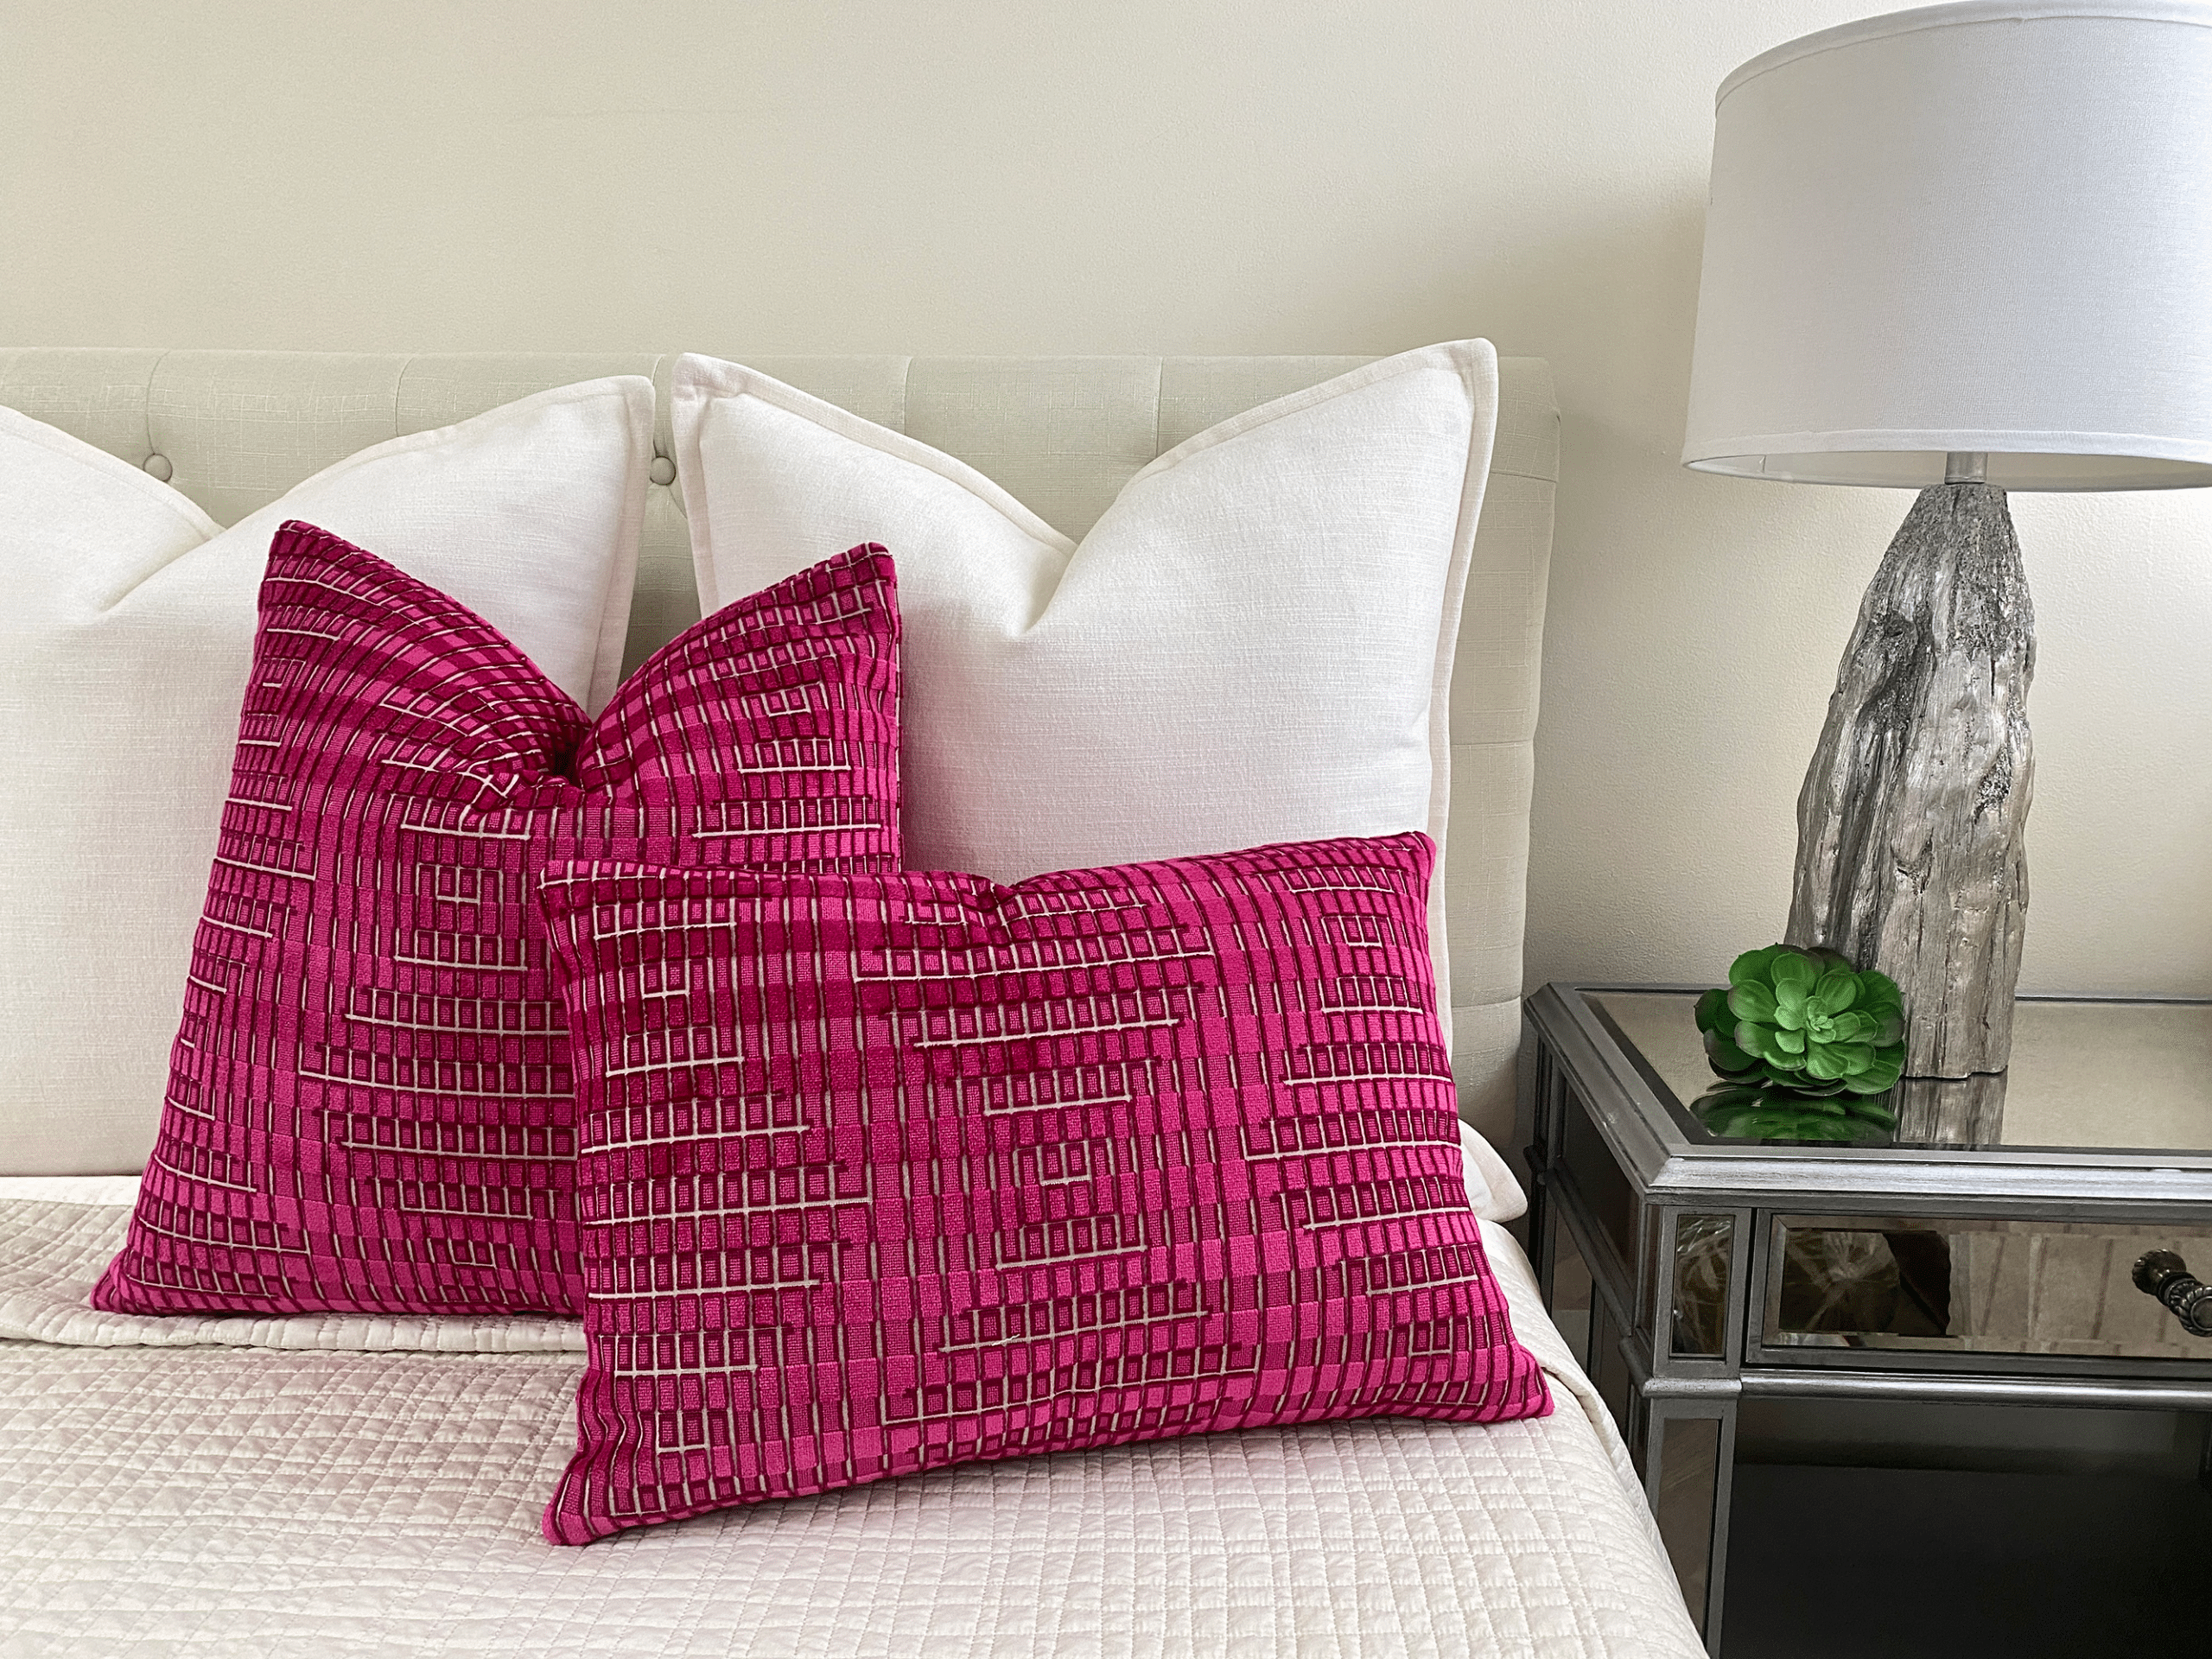 https://smithyhomecouture.com/wp-content/uploads/2021/07/Fuchsia-Berry-on-bed_.png